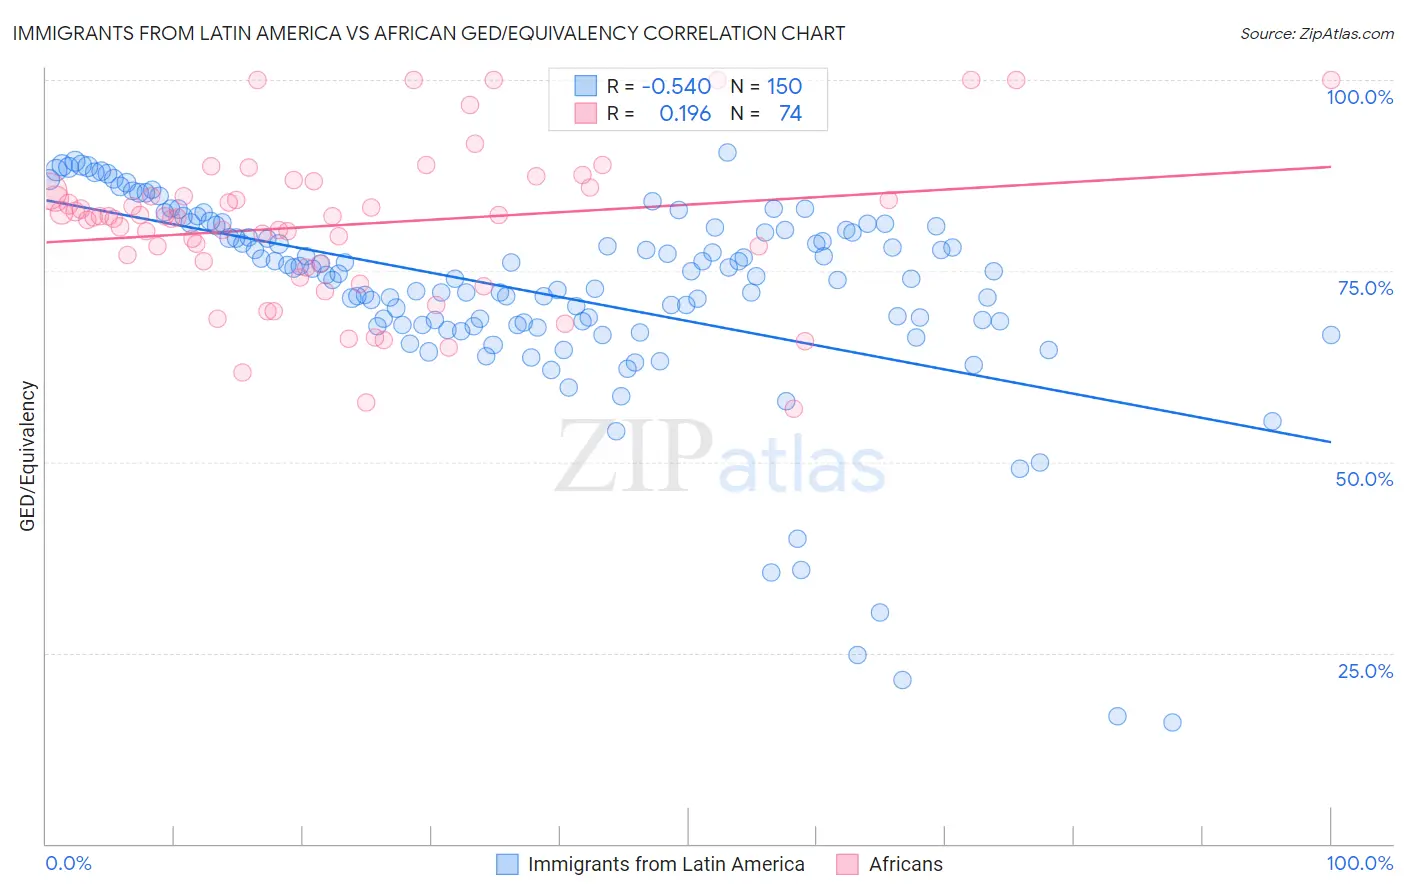 Immigrants from Latin America vs African GED/Equivalency